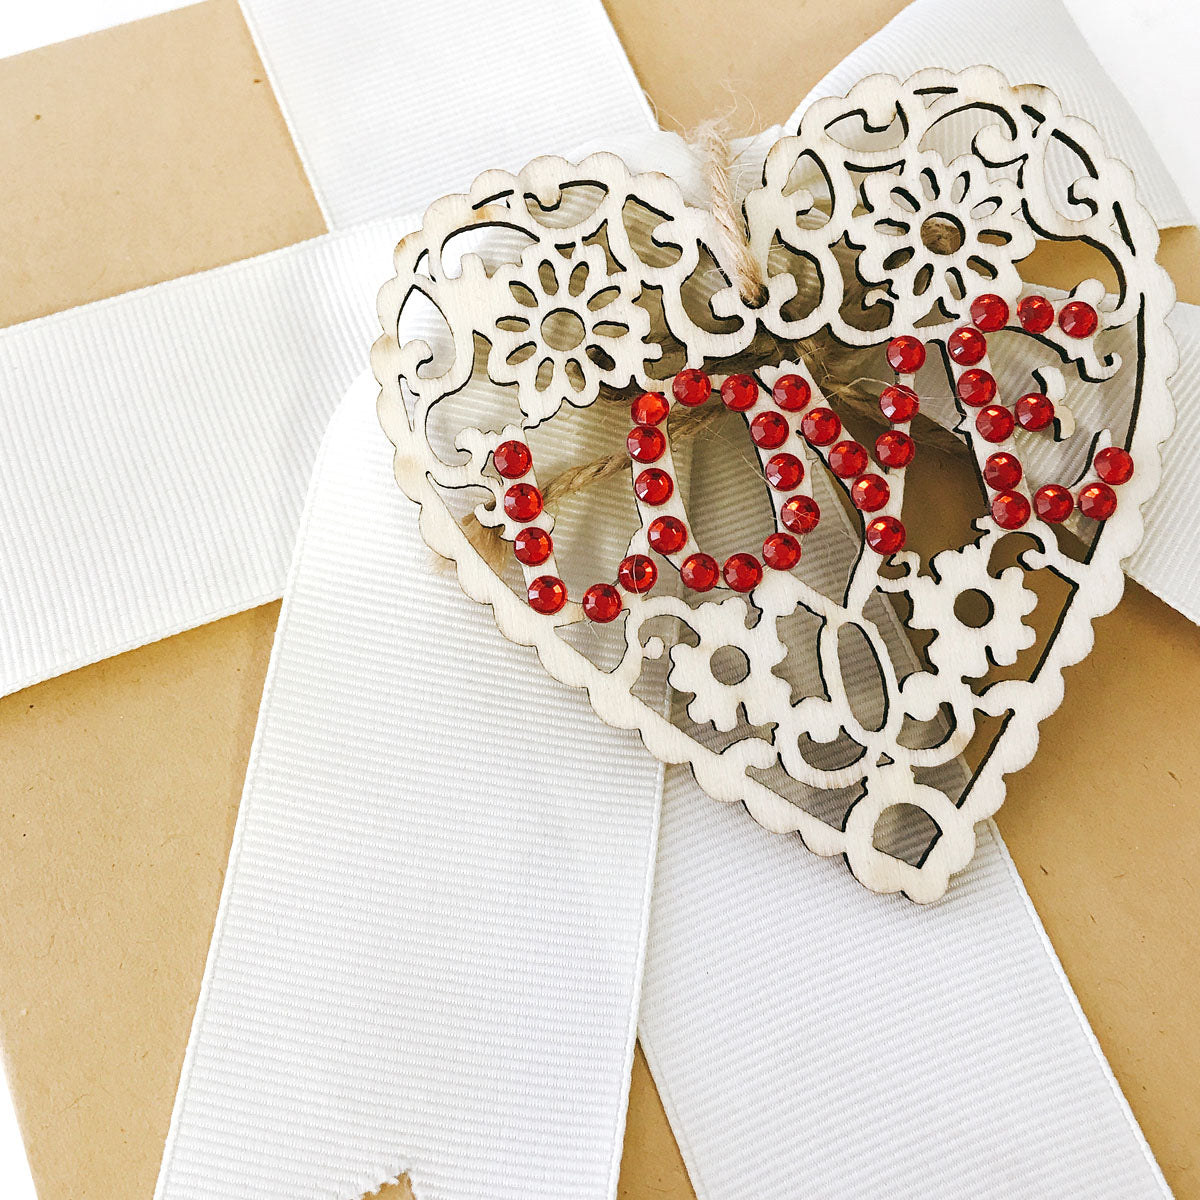 Wrapables Wooden Heart Ornament Hanging Love Decoration (Set of 20)